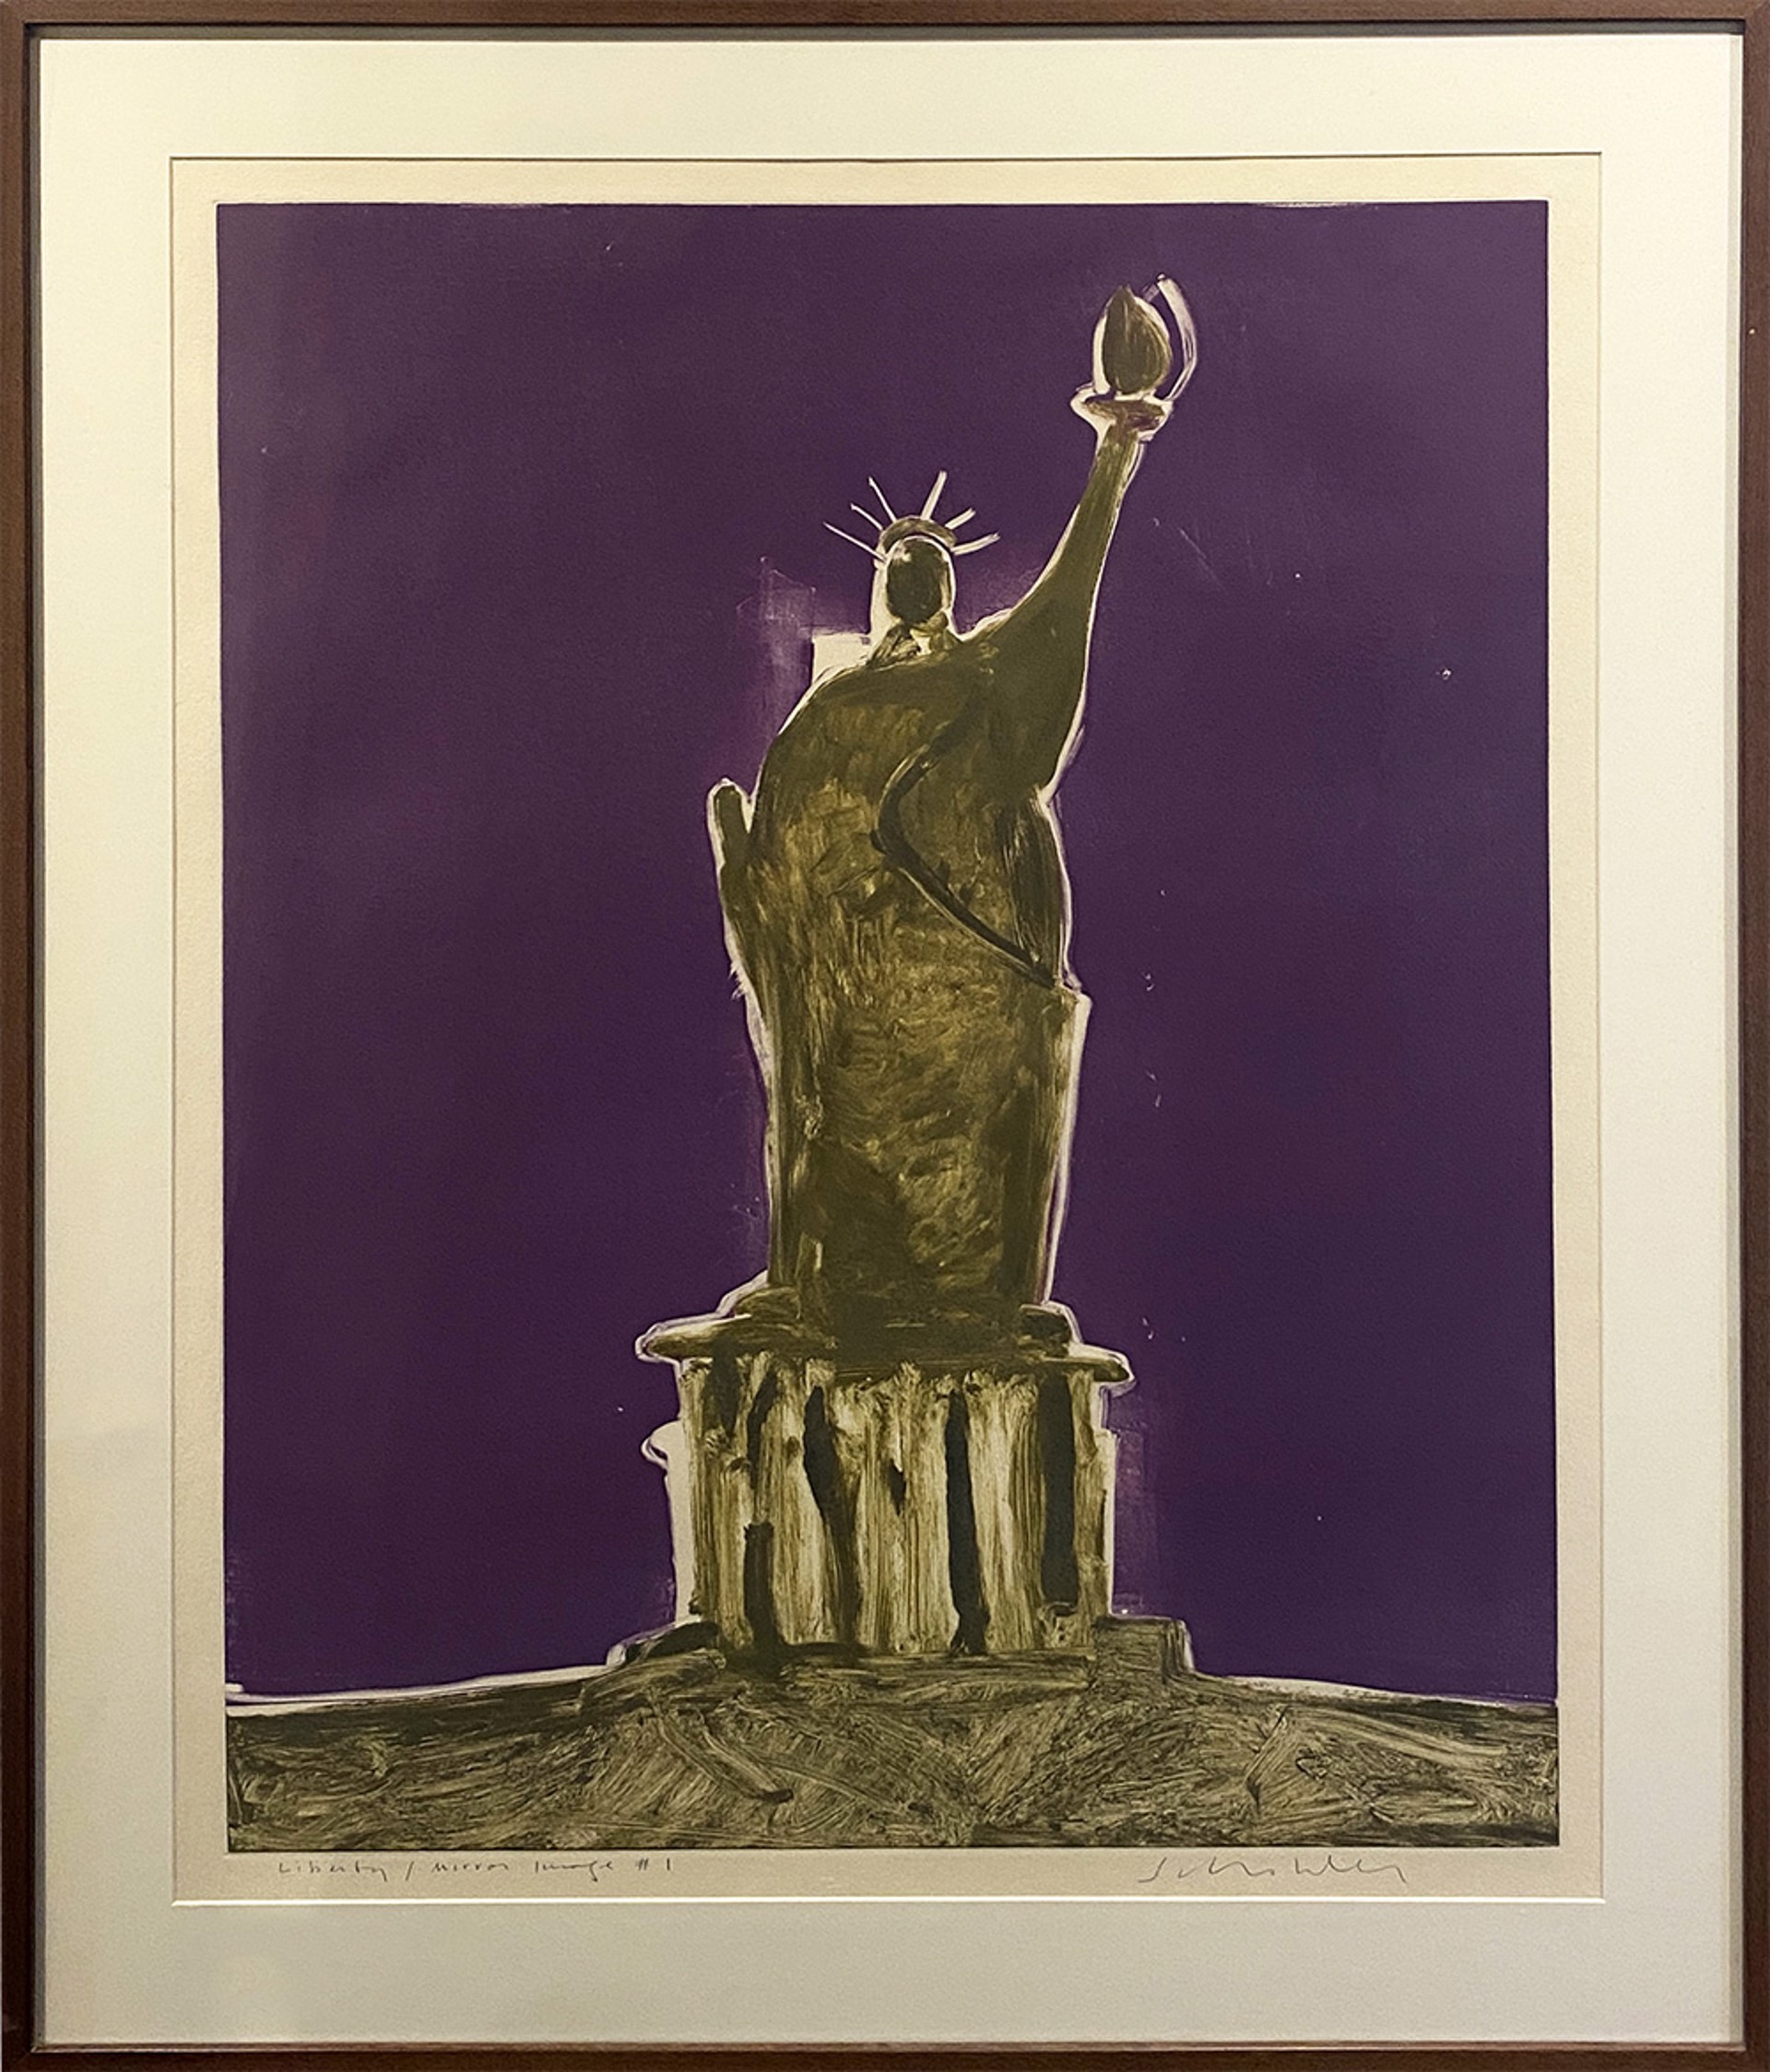 Liberty / Mirror Image #1 by Fritz Scholder